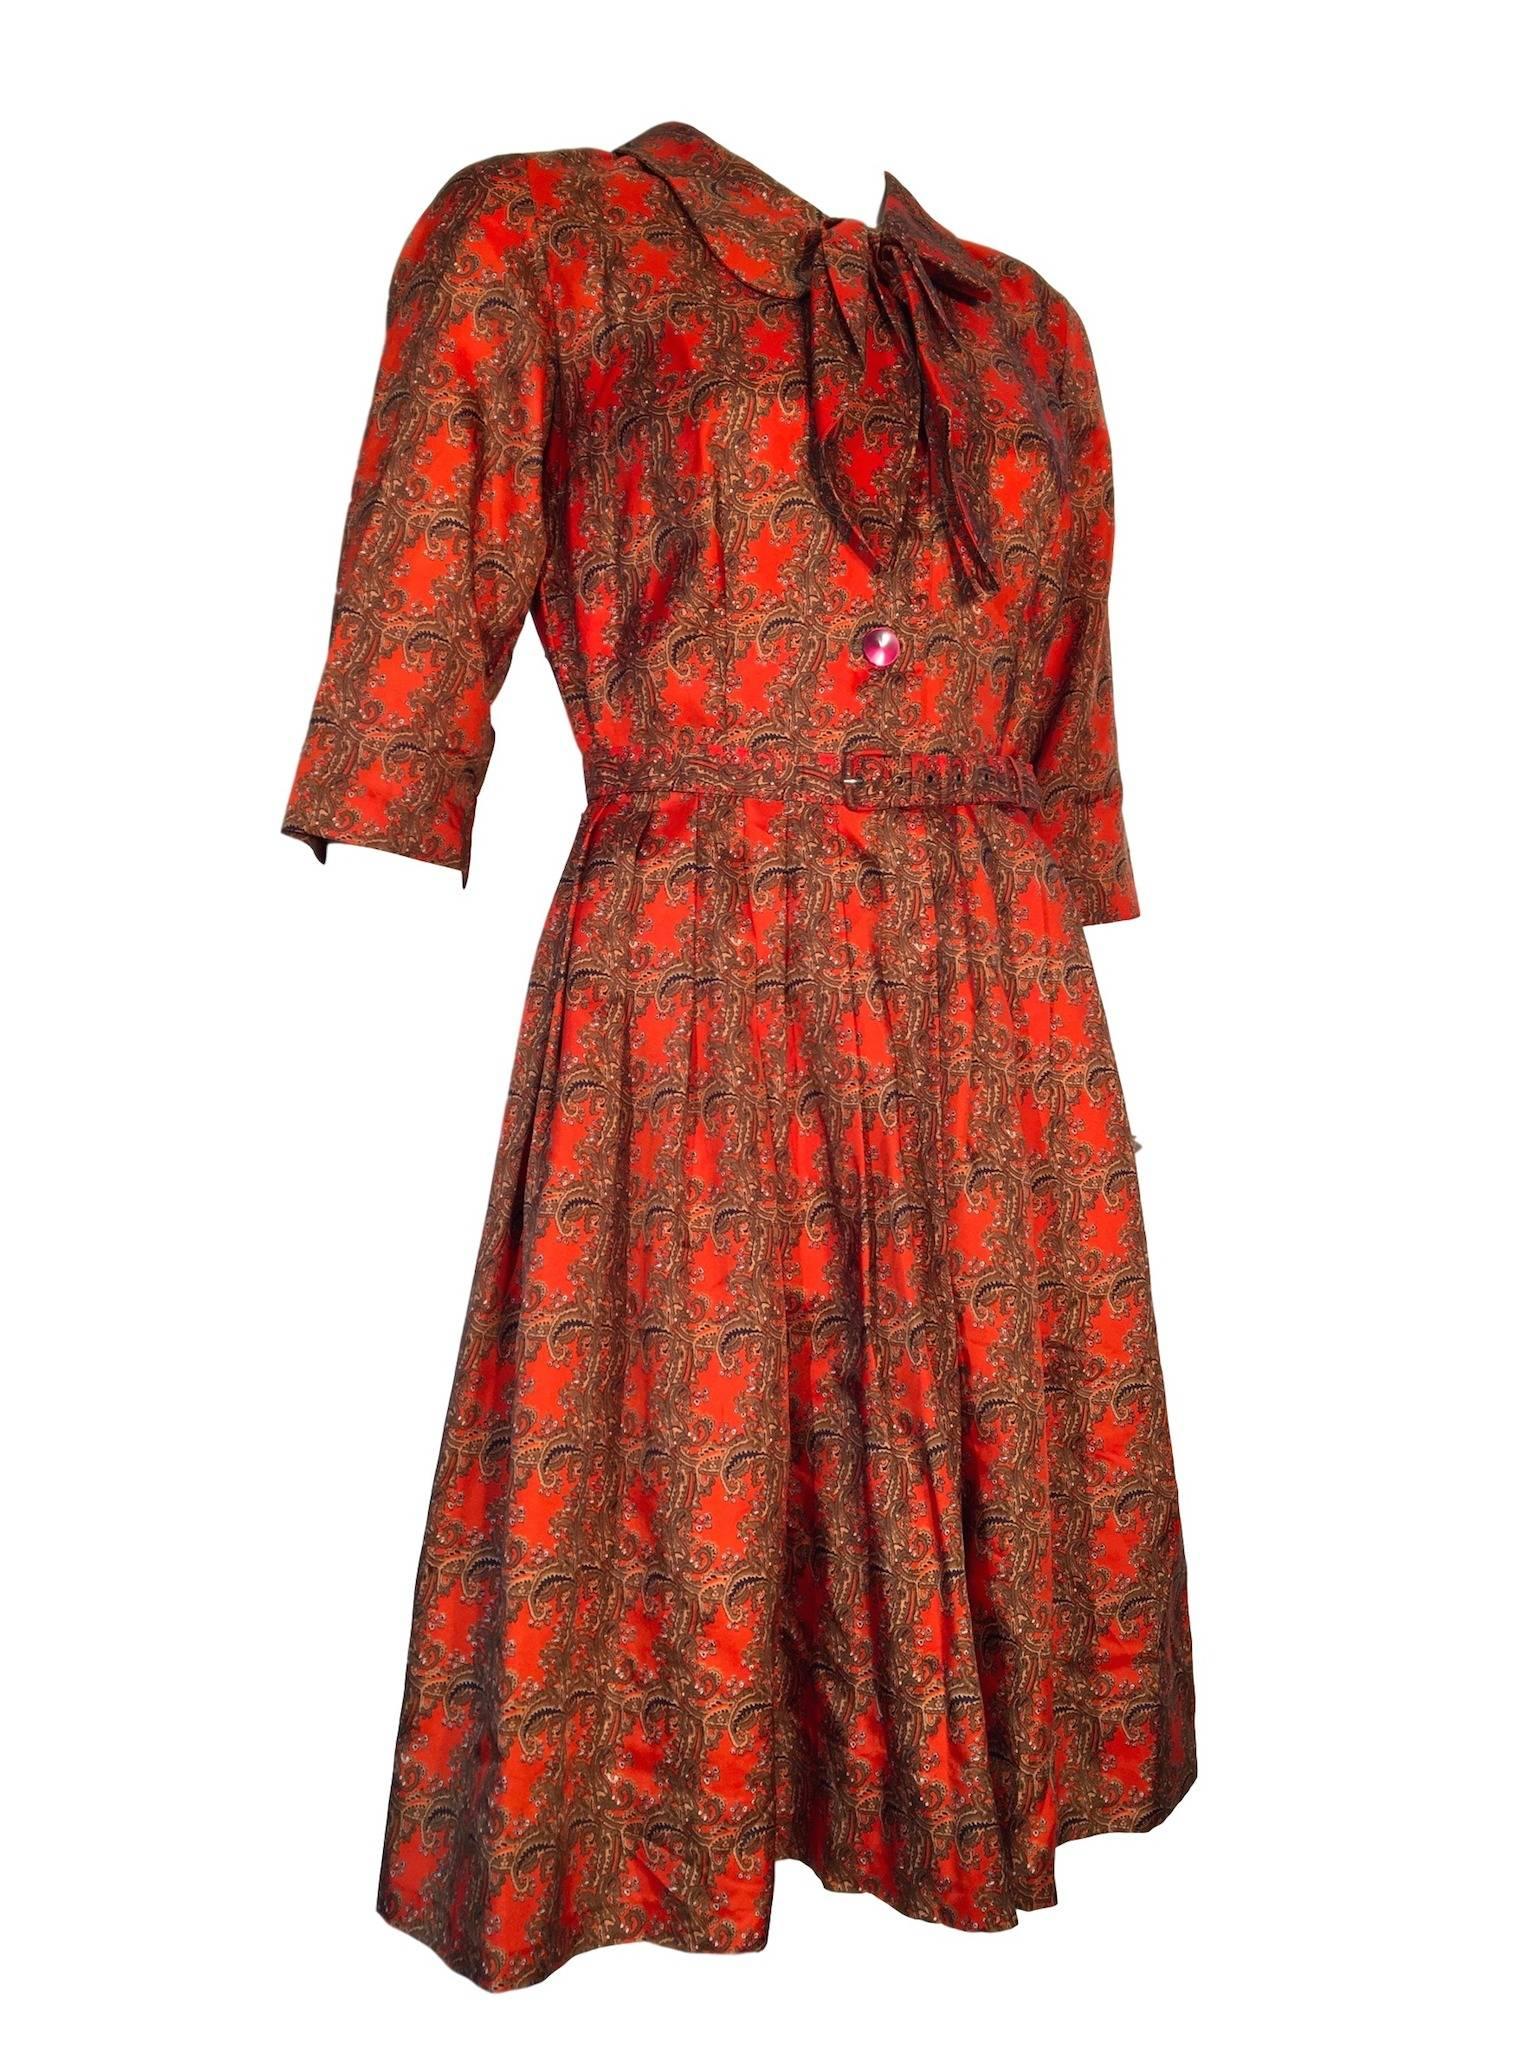 Julius Tricel material paisley orange fit & flare dress, has button front and matching belt.

In excellent condition 

Size UK 10, Measures 18 inches across bust, 14 inches across waist and 40 inches total length, all taken with garment laid flat
